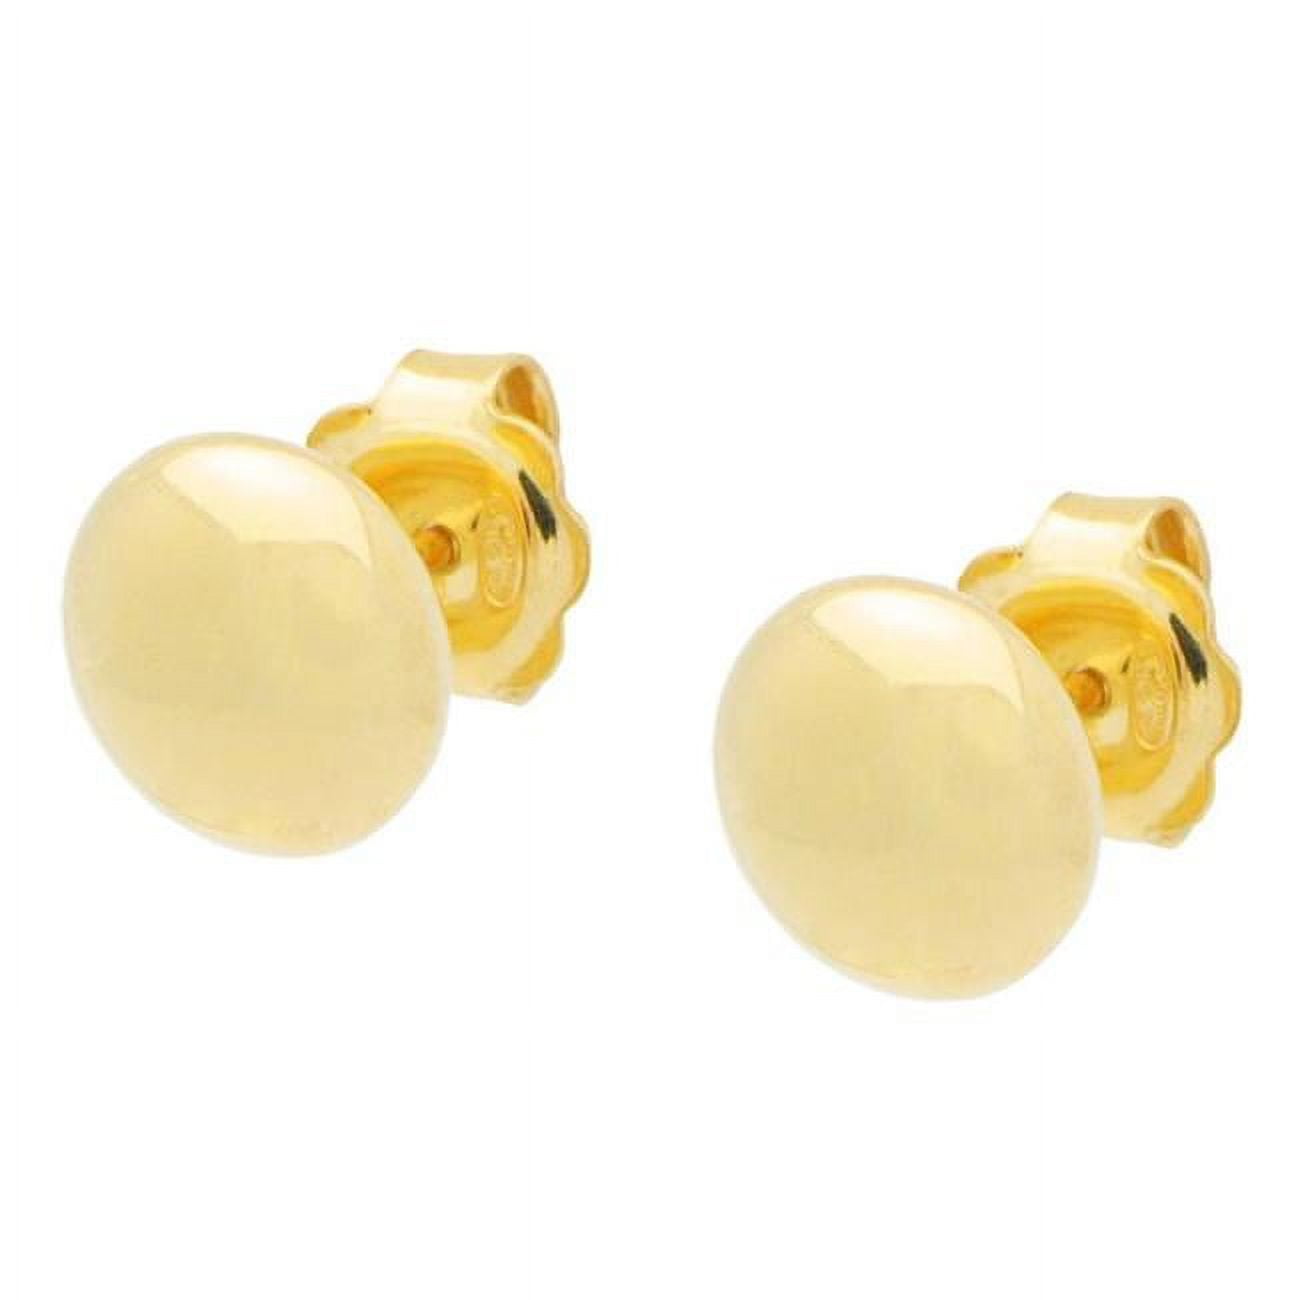 415119g 6 Mm Mirror Gold Button Stud Earrings In Sterling Silver